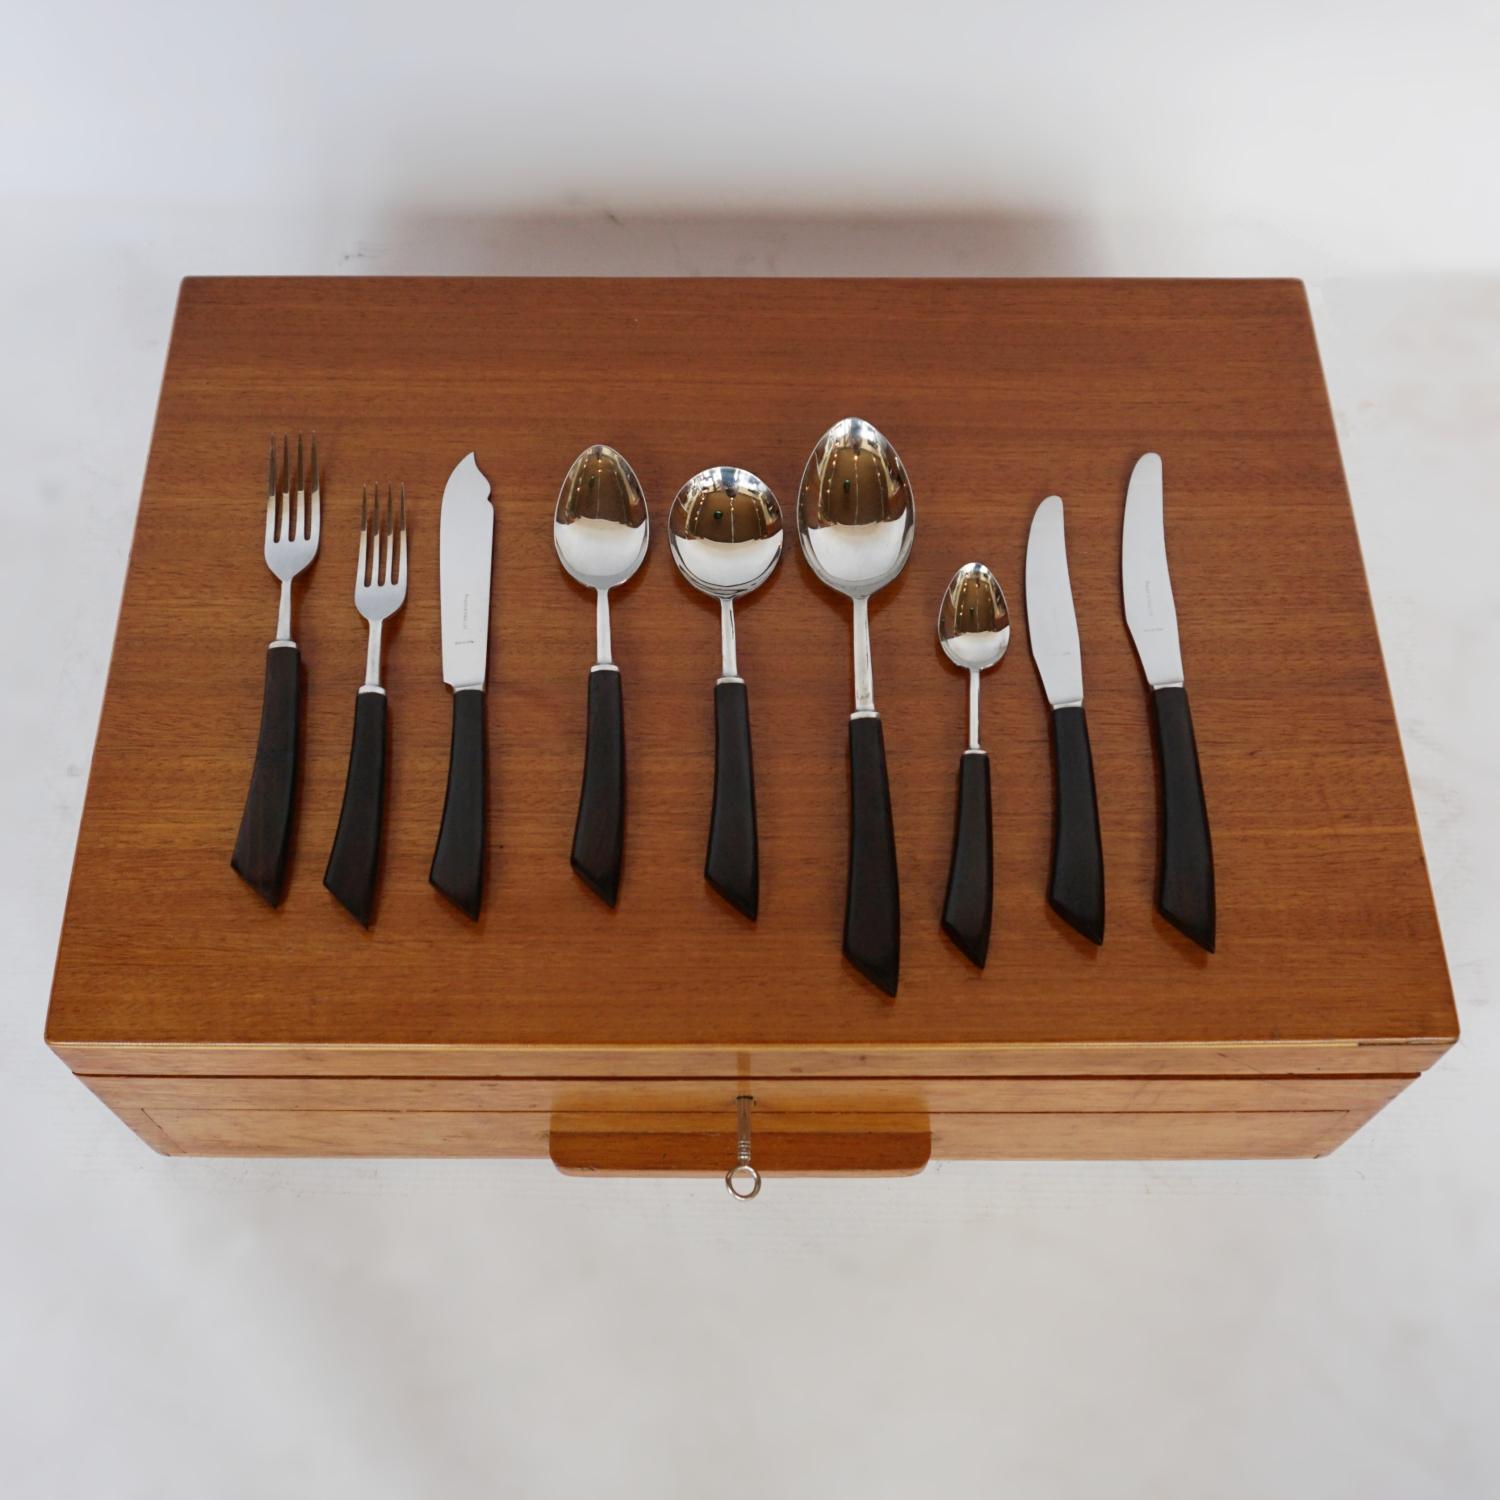 An eight-setting cutlery canteen by Mappin & Webb. Stainless steel with curved macassar ebony handles. Together with original carving knife and sharpening steel. Neatly arranged in a Walnut box. Excellent original condition. 

Dimensions: H 15cm W